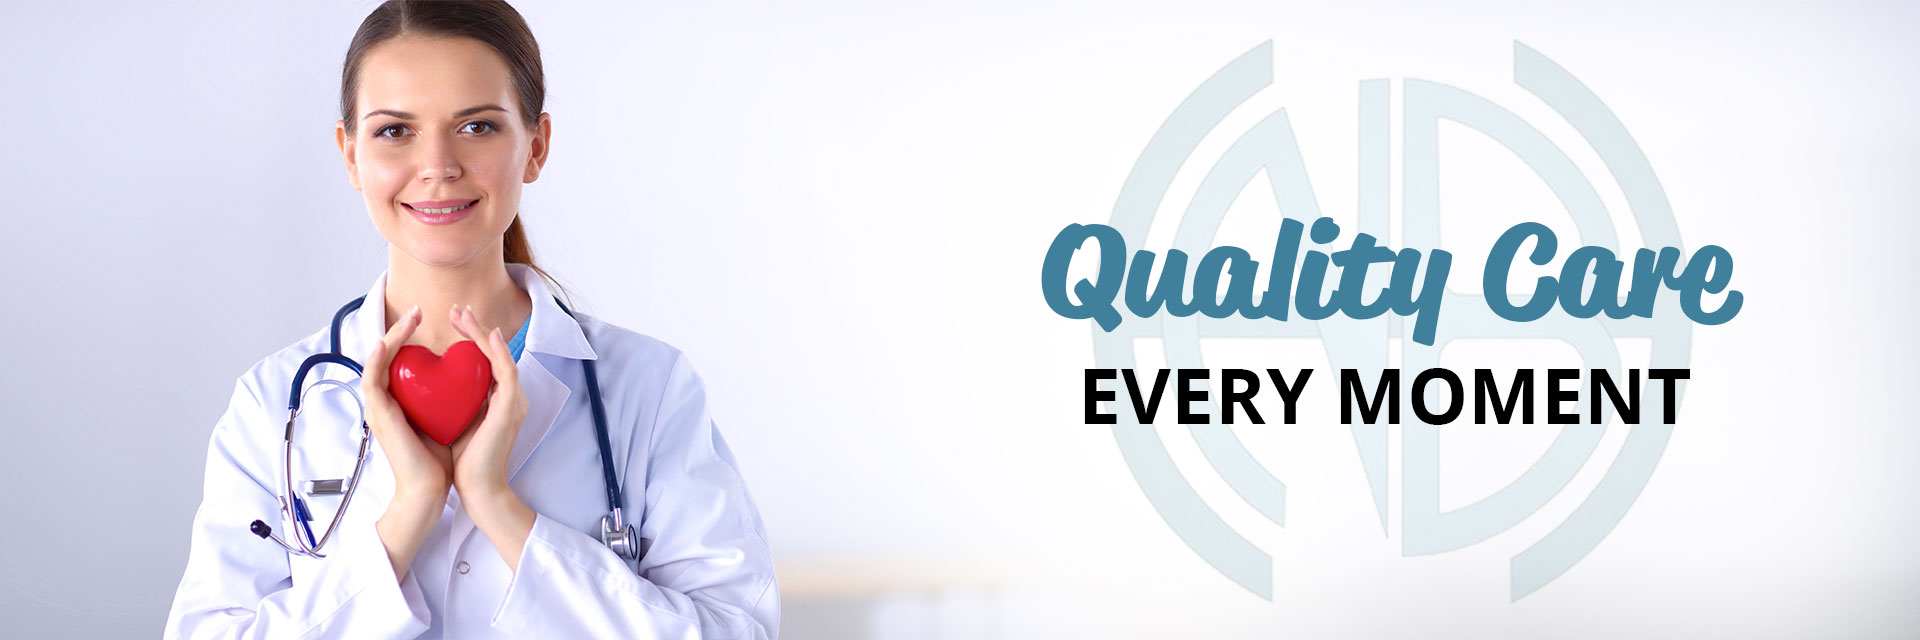 Quality Care
EVERY MOMENT